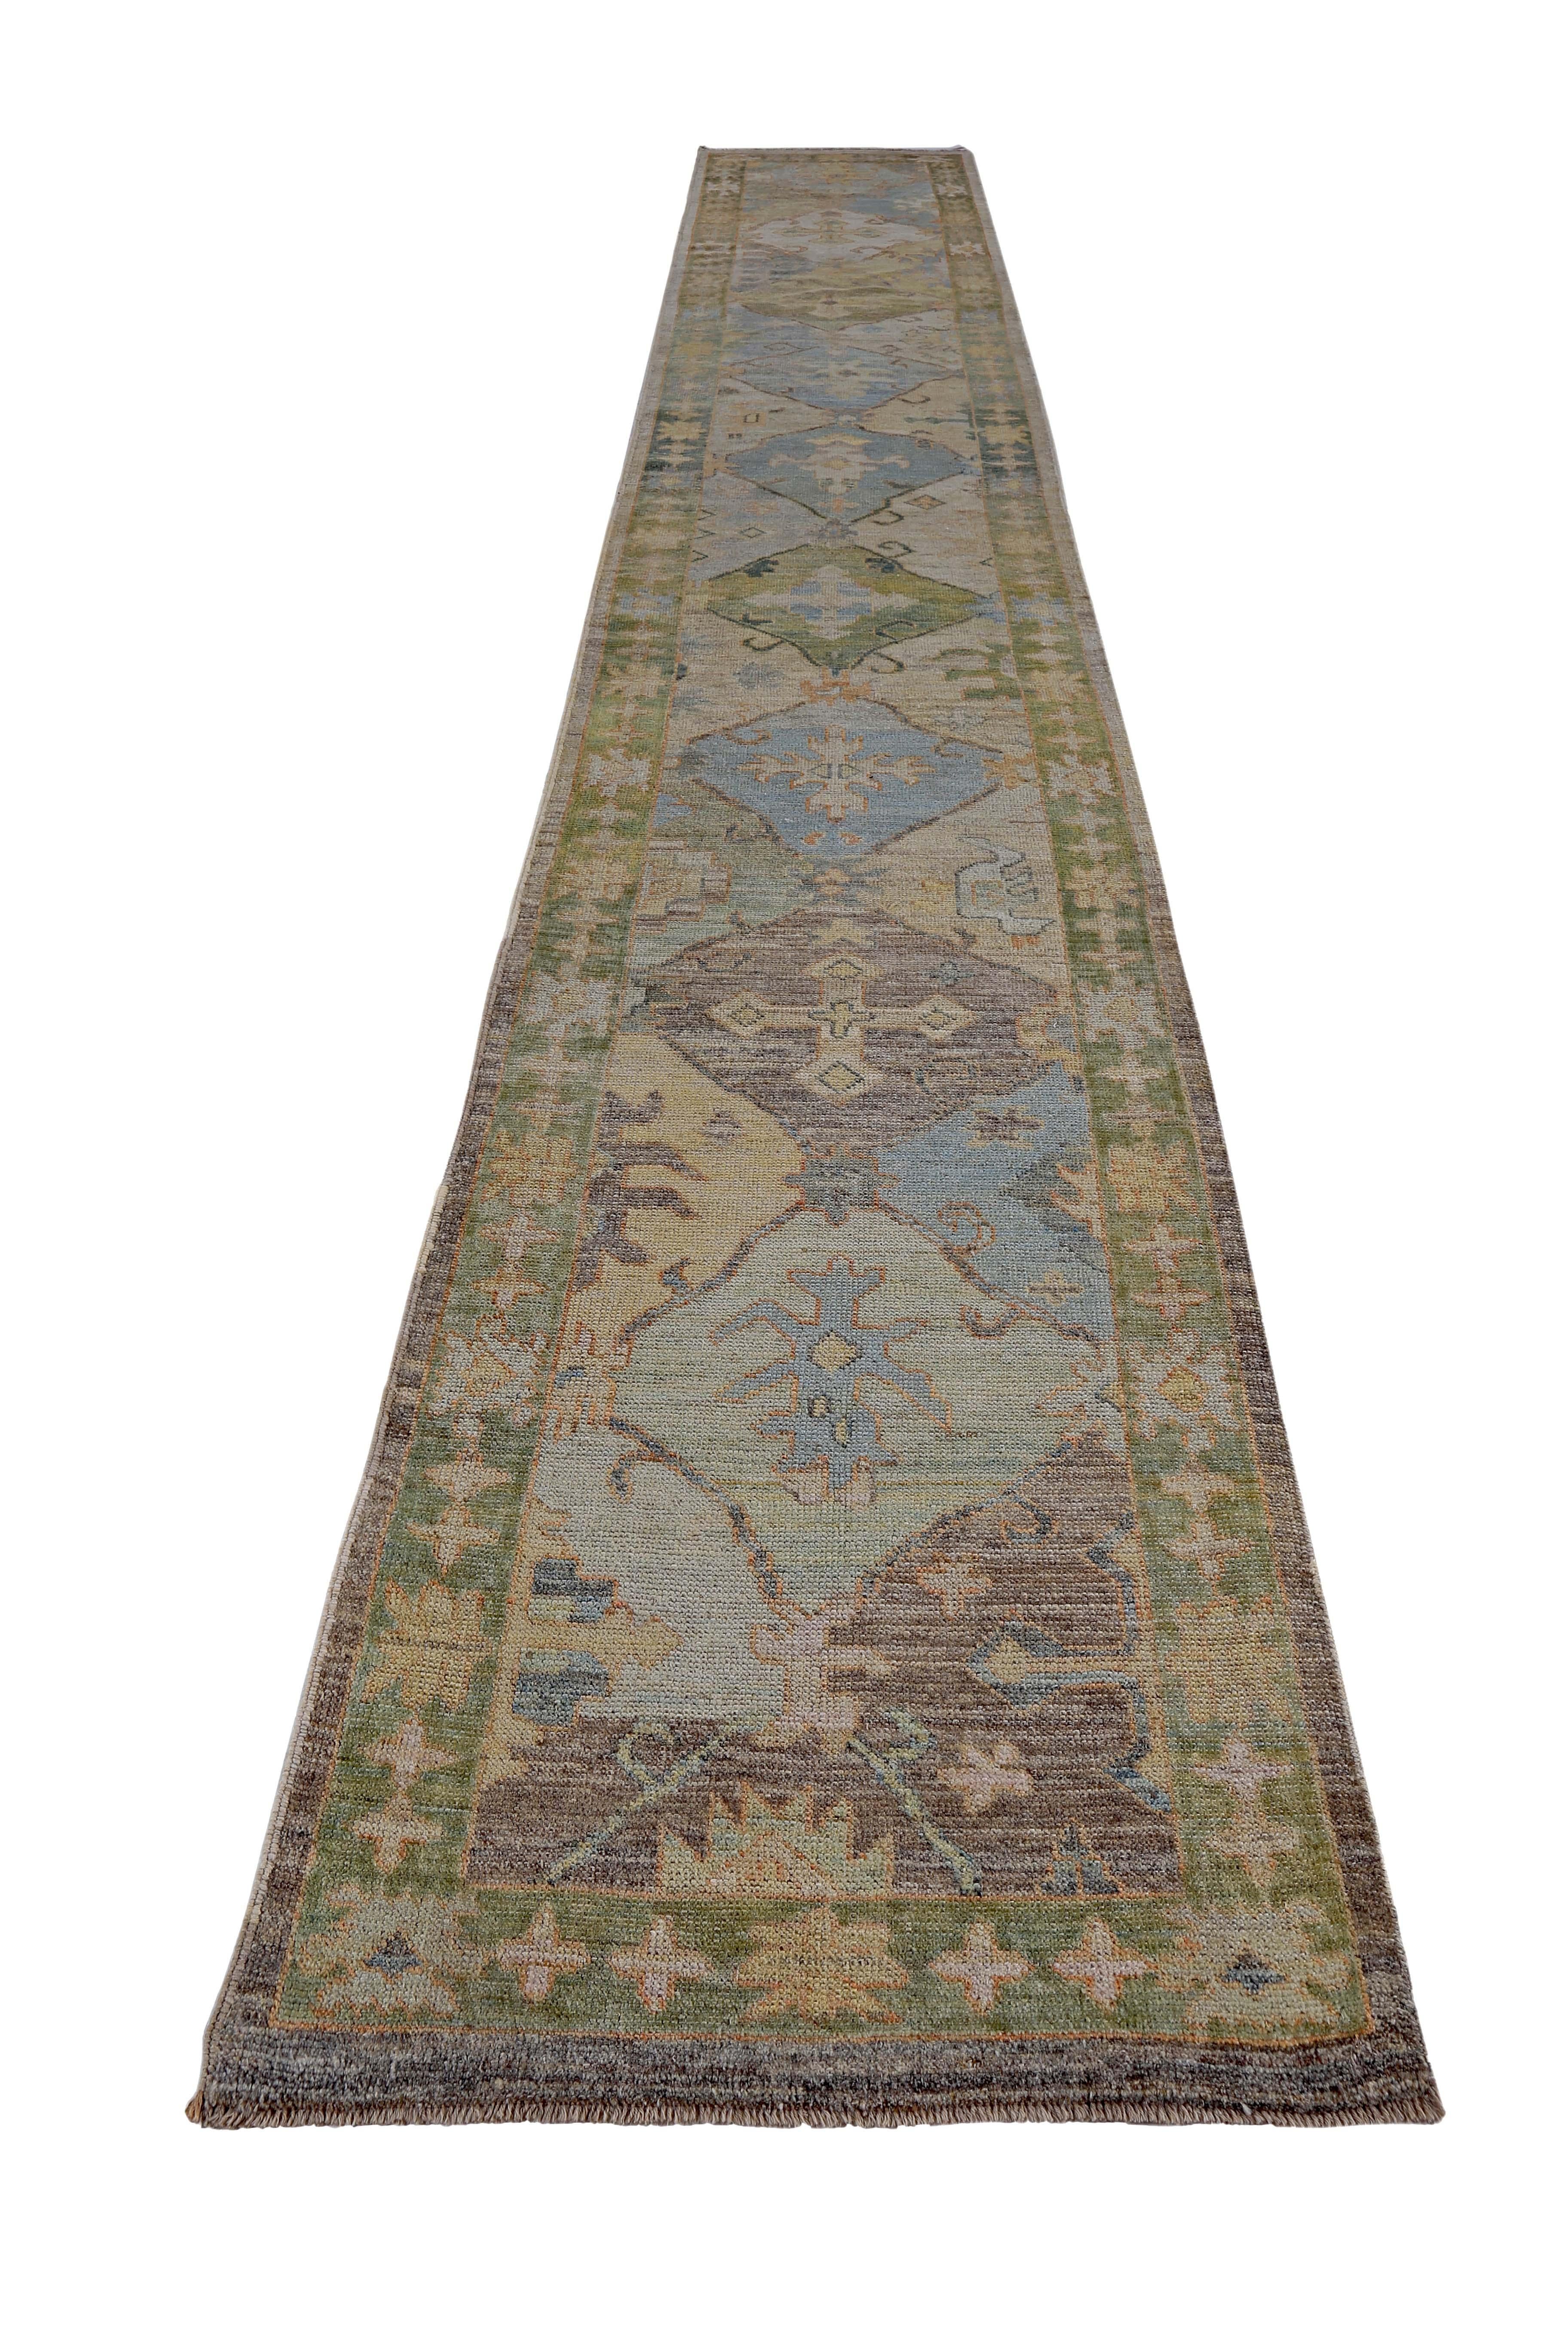 Turkish runner rug made of handwoven sheep’s wool of the finest quality. It’s colored with organic vegetable dyes that are certified safe for humans and pets alike. It features beige and blue floral patterns on a beautiful brown and green field.